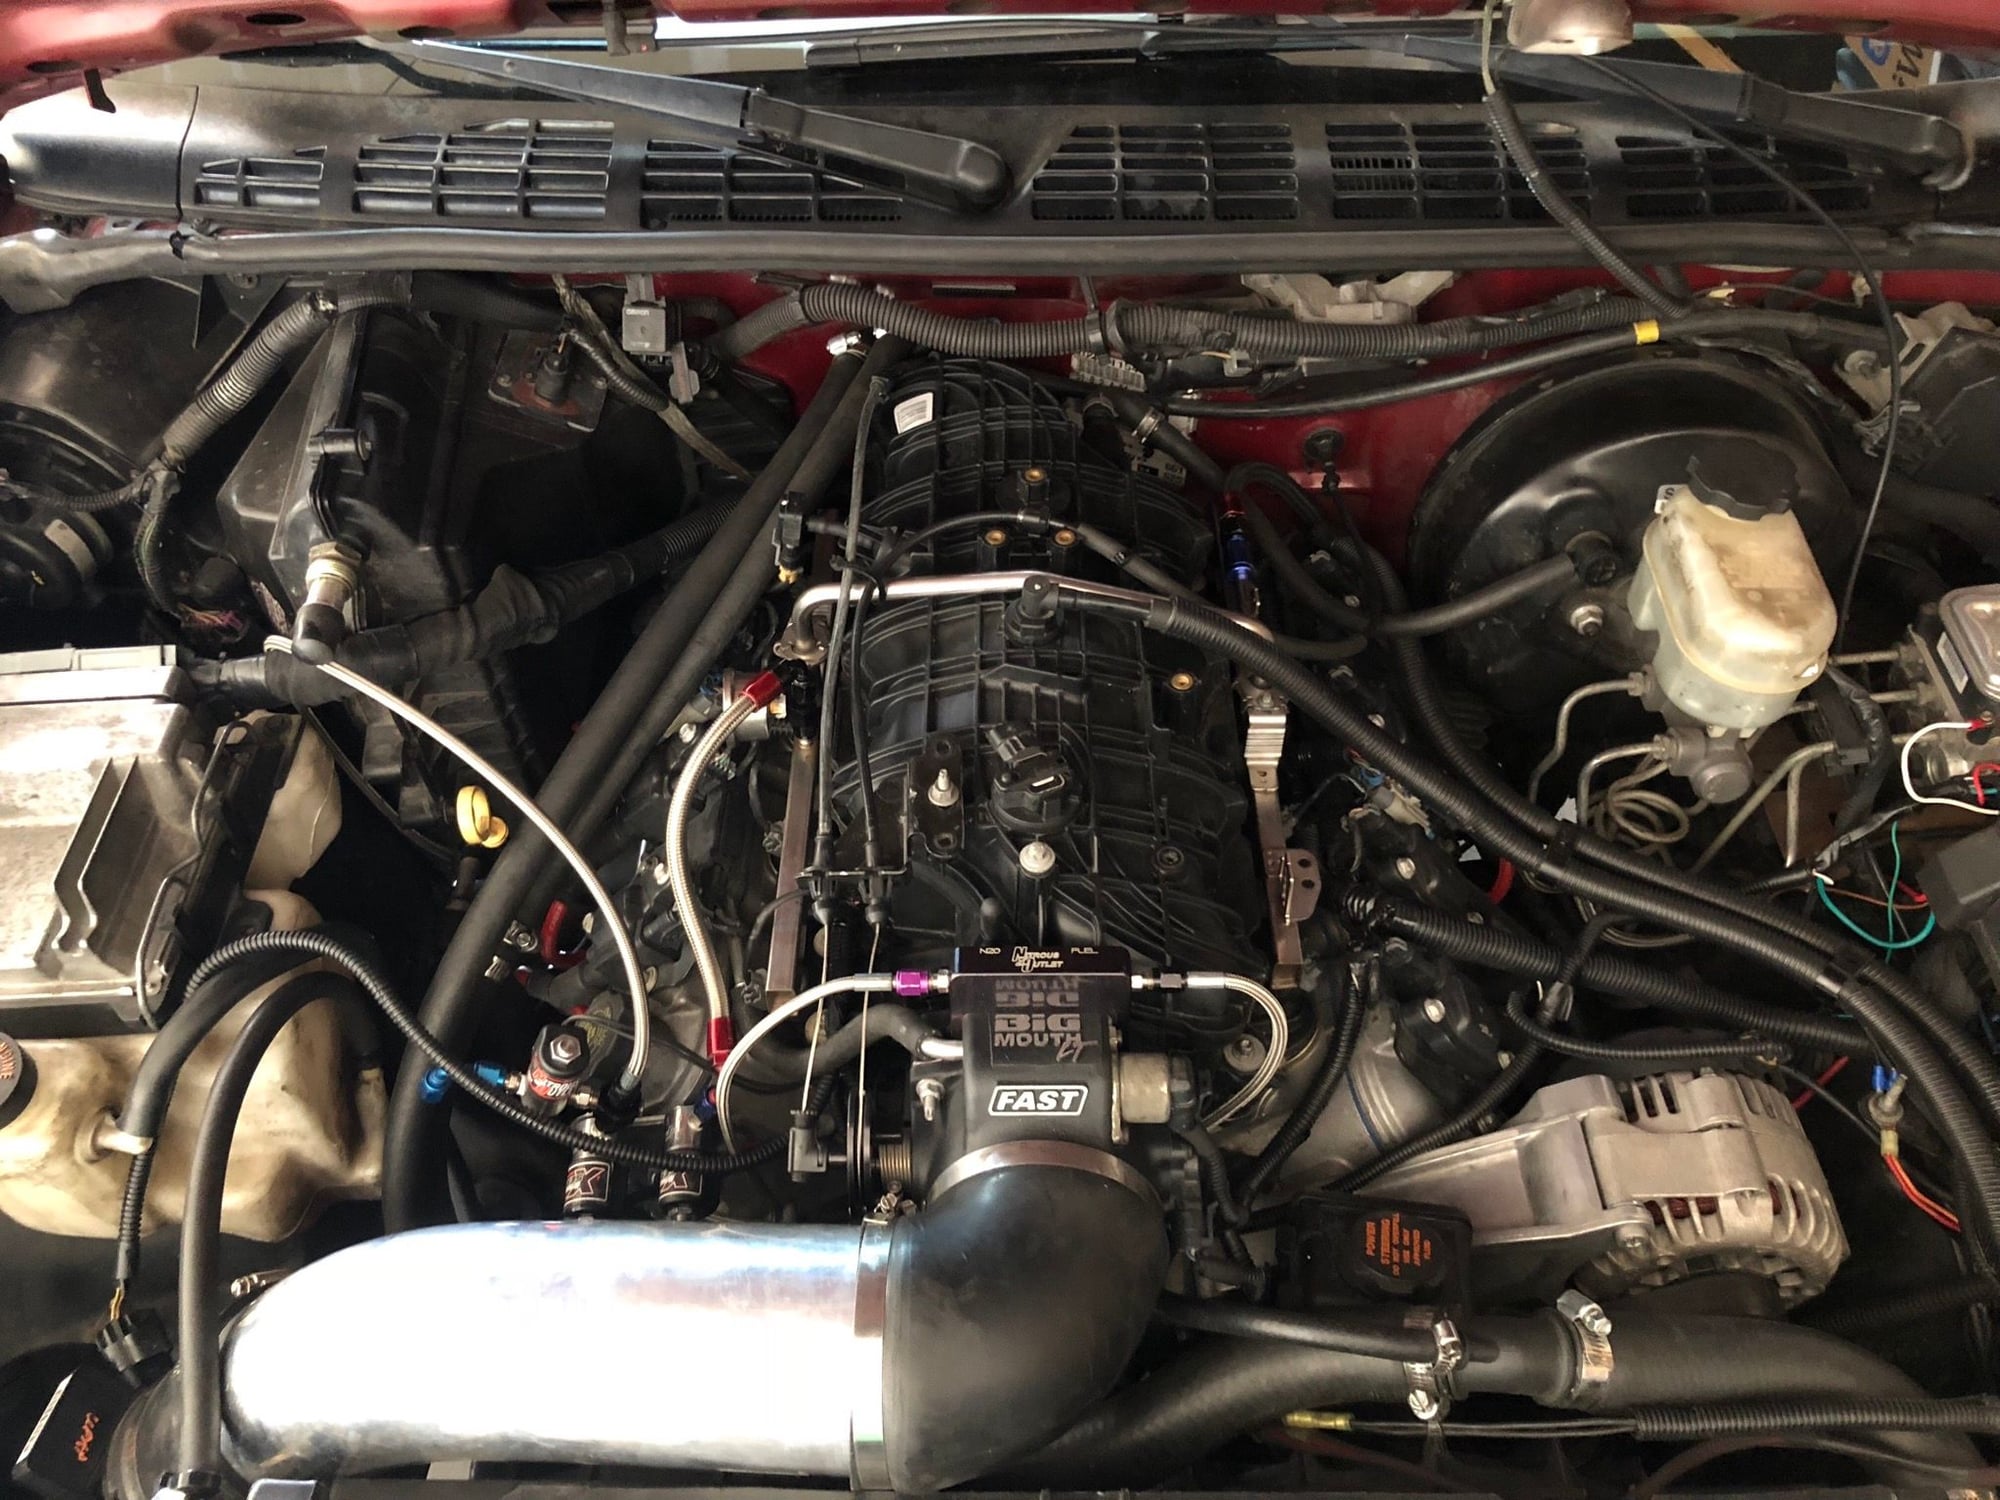  - Wet Nitrous Setup, LS3 Coils, and S10 Headers - Colorado Springs, CO 80925, United States